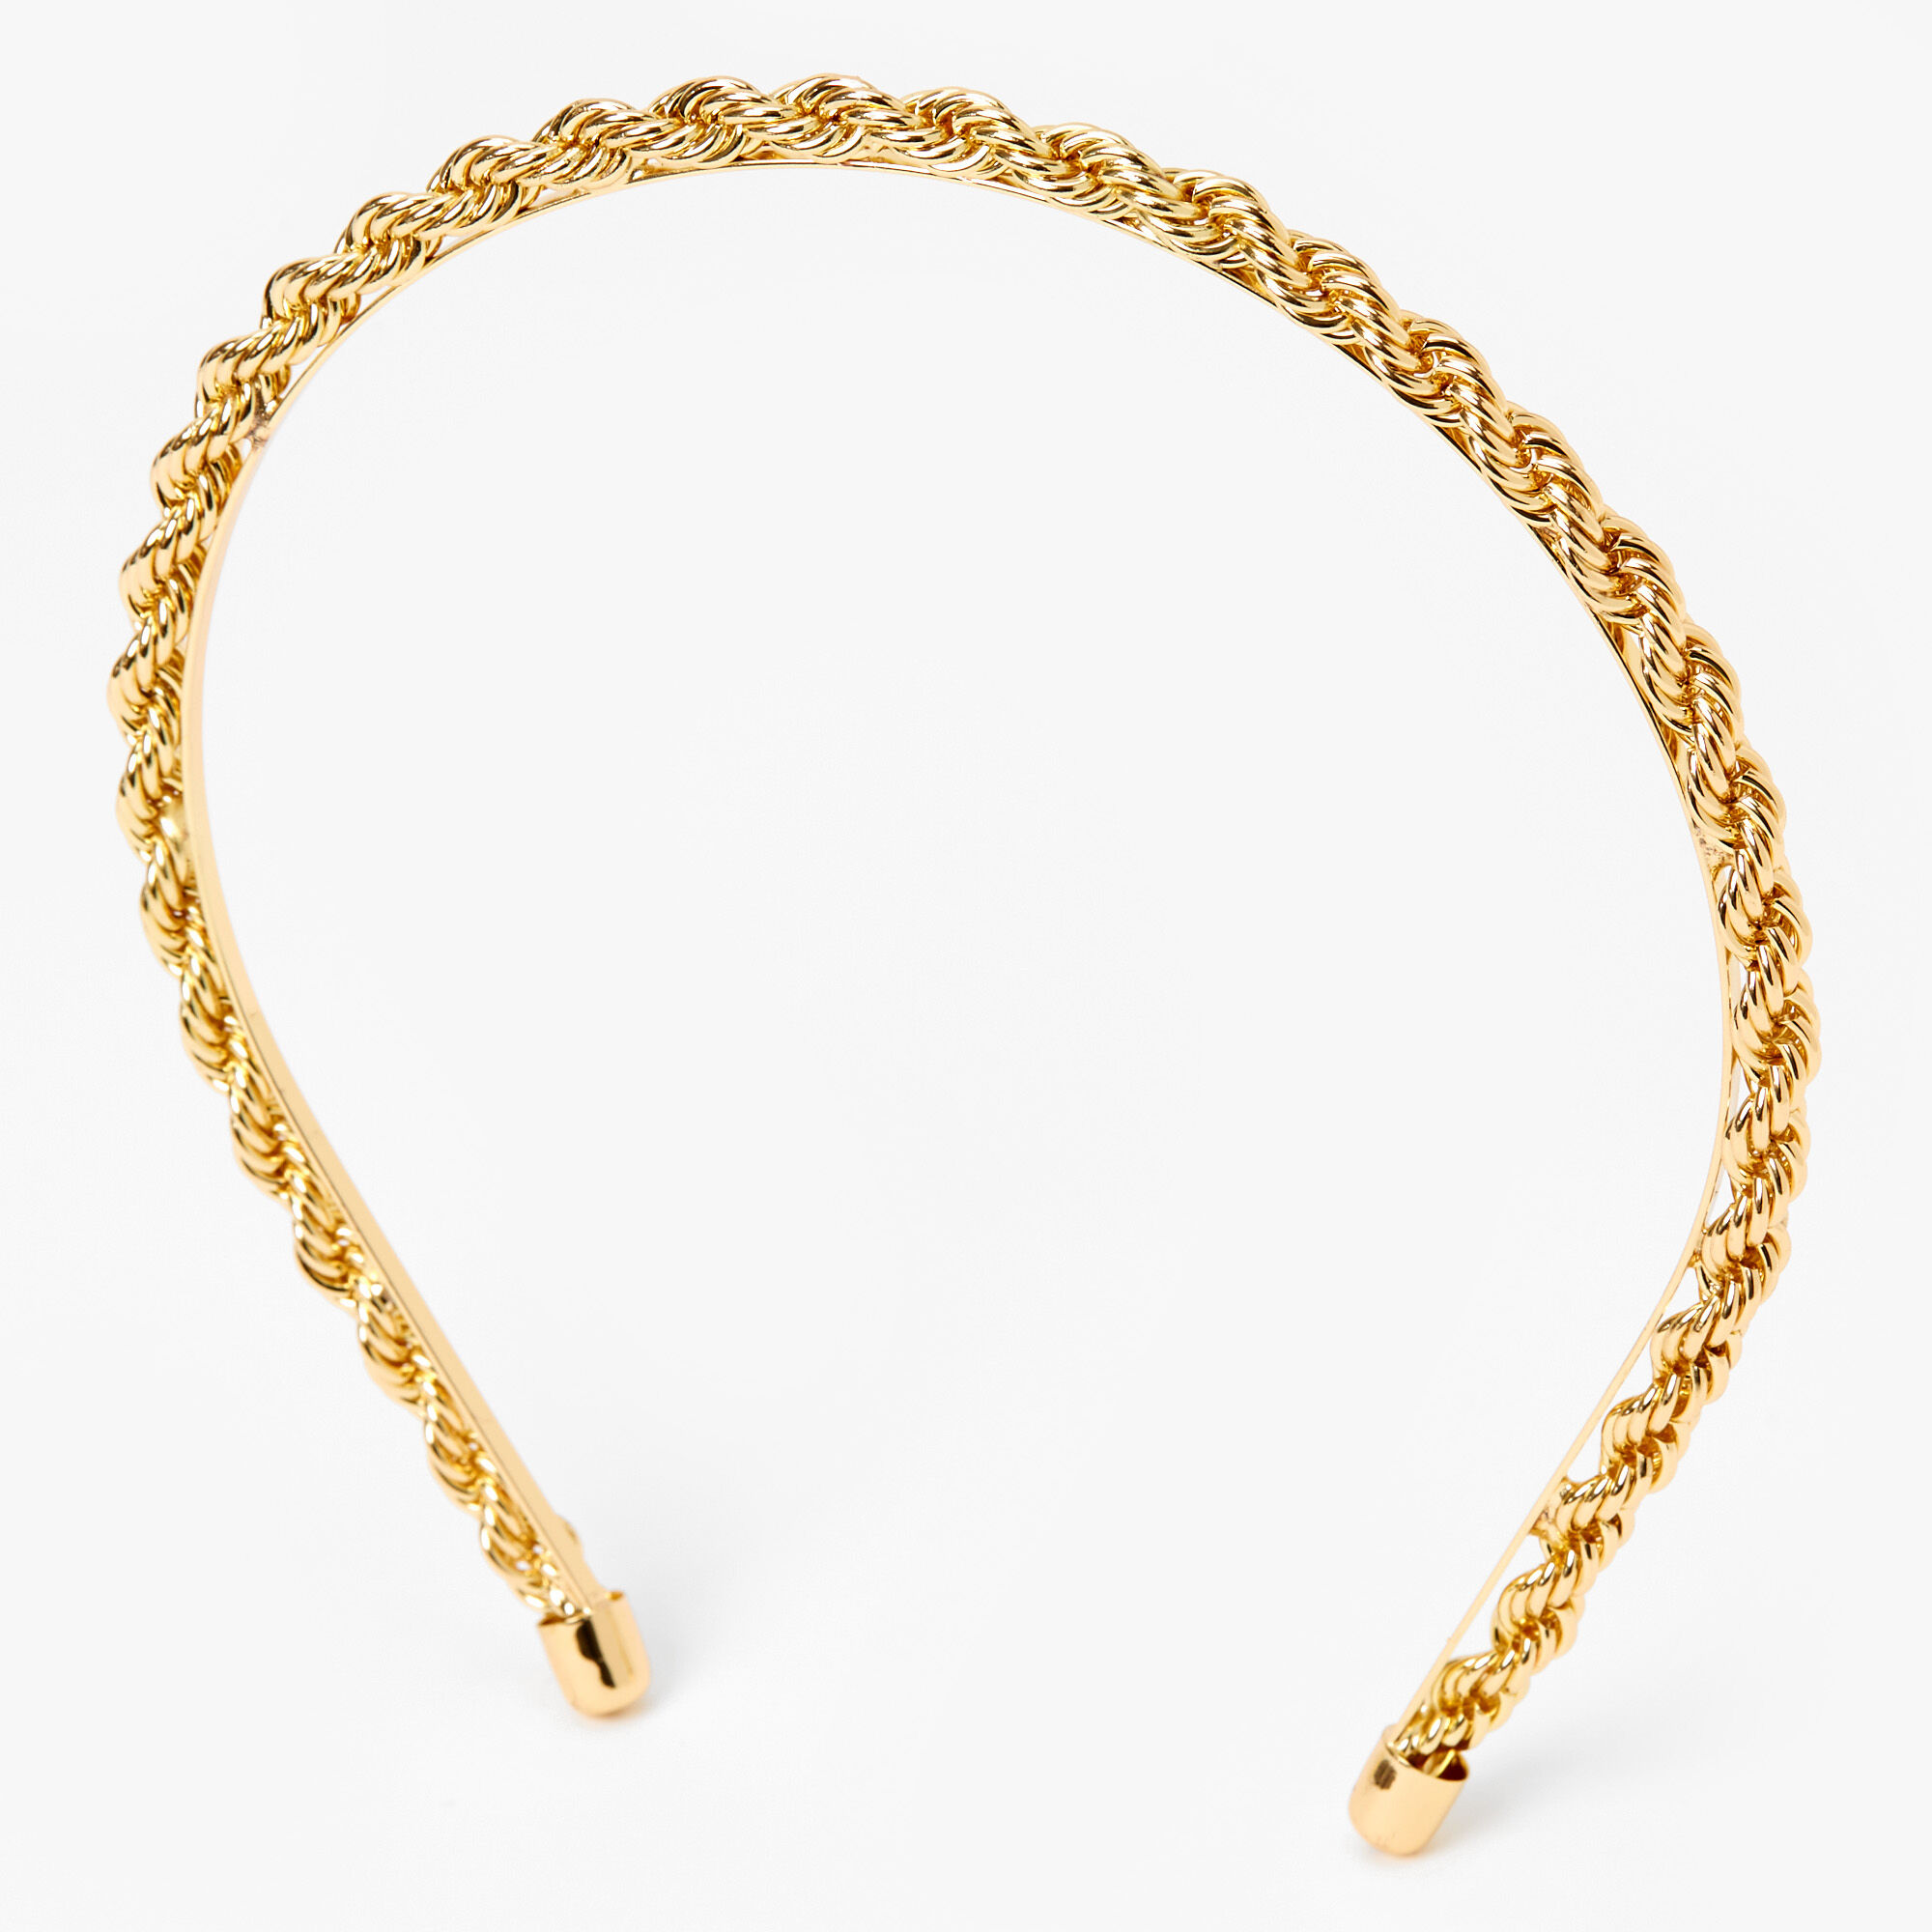 View Claires Twisted Chain Headband Gold information